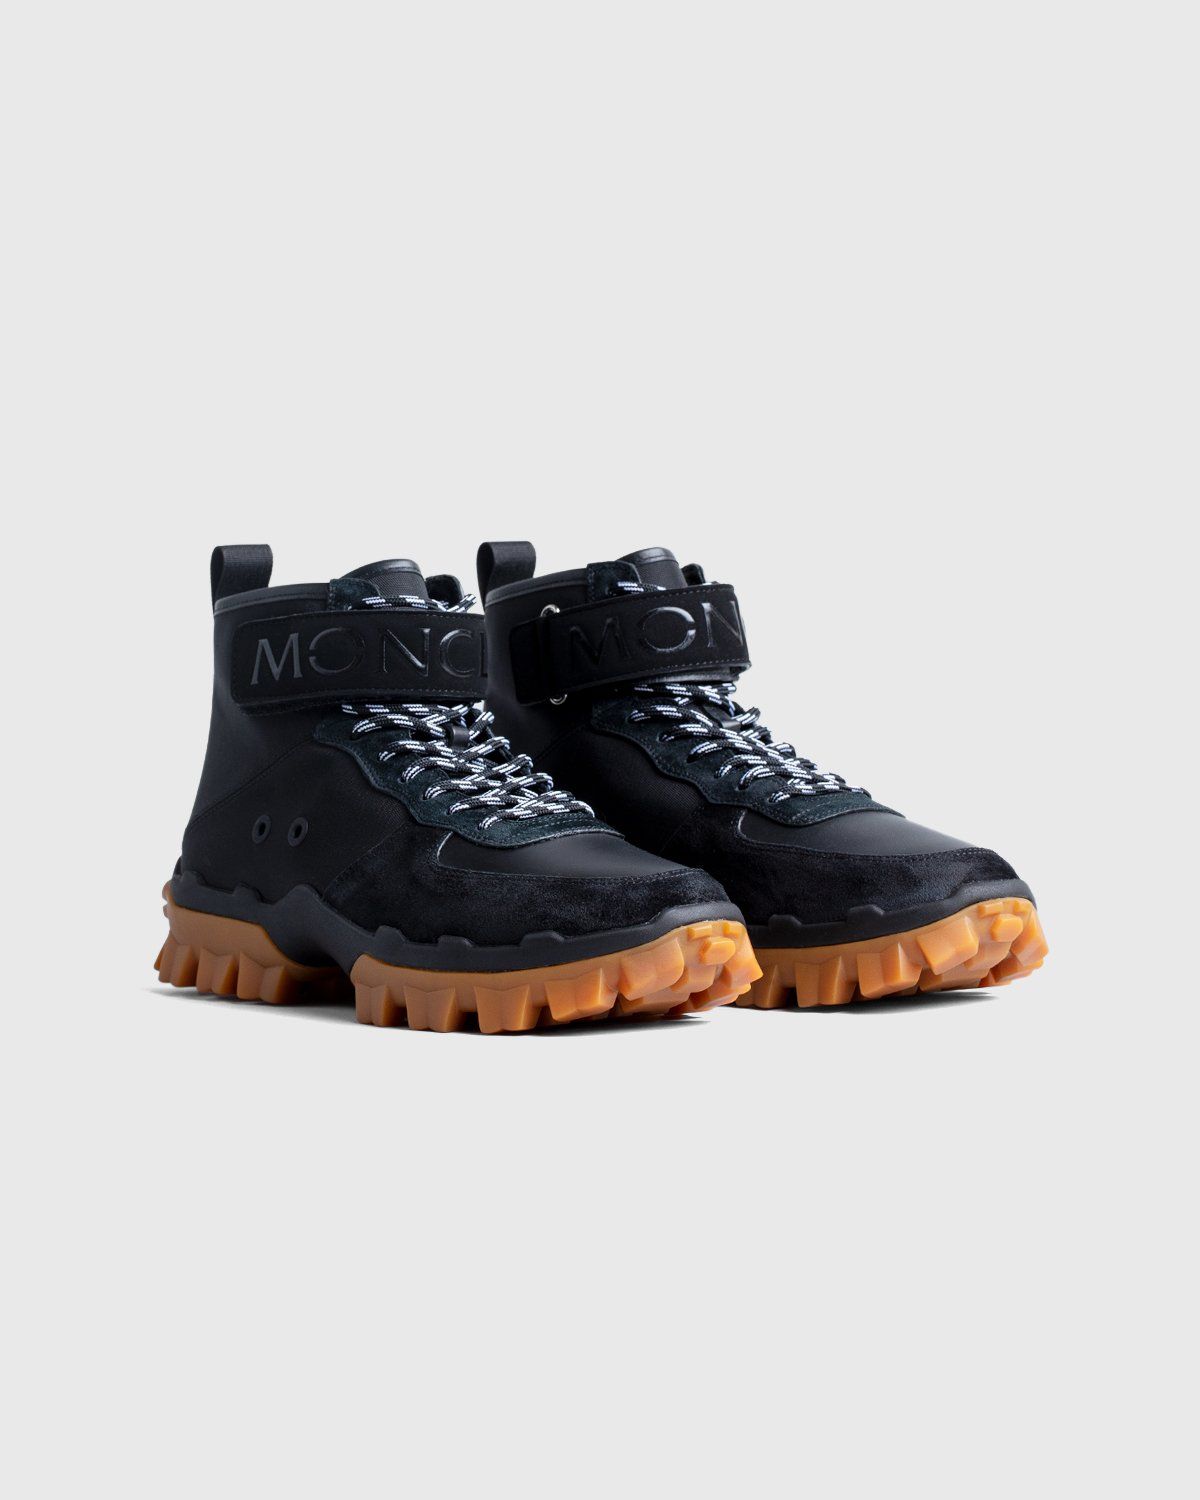 Moncler Genius – Recycled Hugo Shoes - Hiking Boots - Black - Image 3